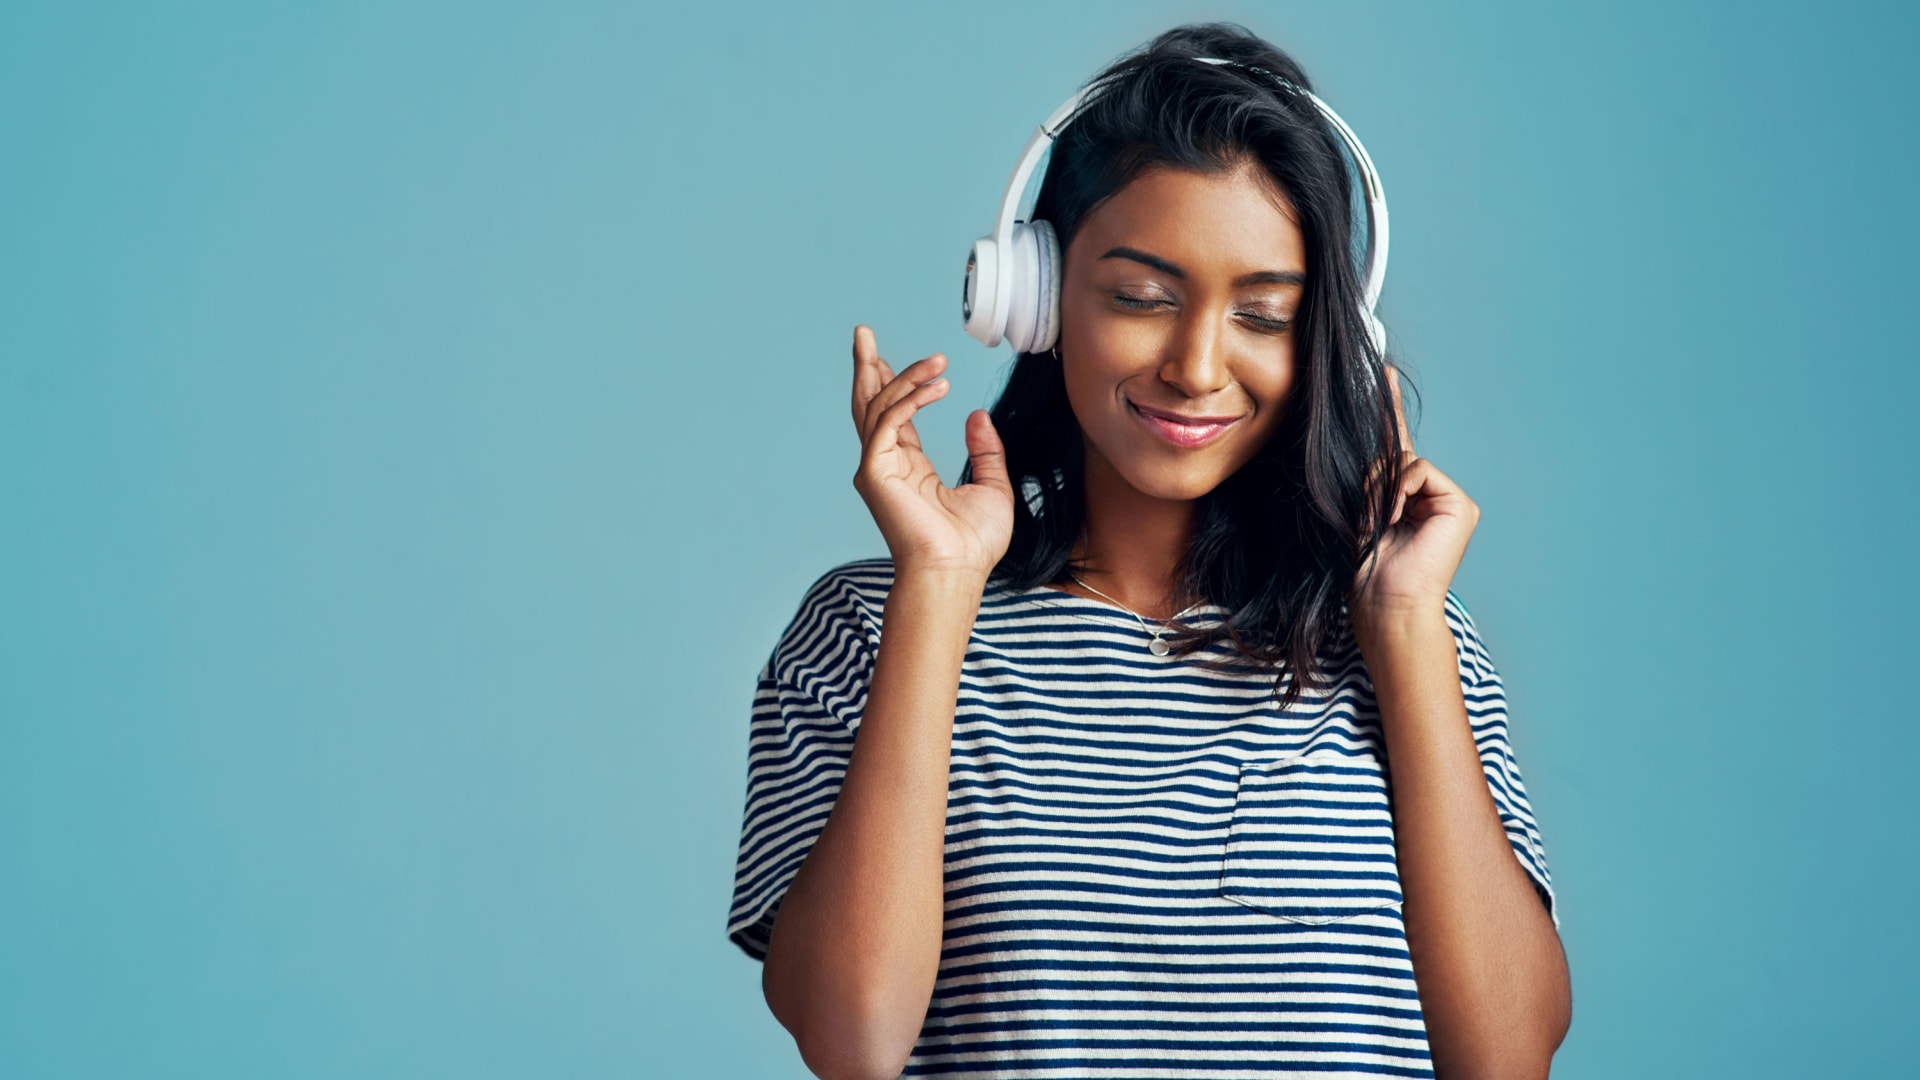 These 715 Songs Are Scientifically Proven to Give You Goosebumps and Change Your Mood